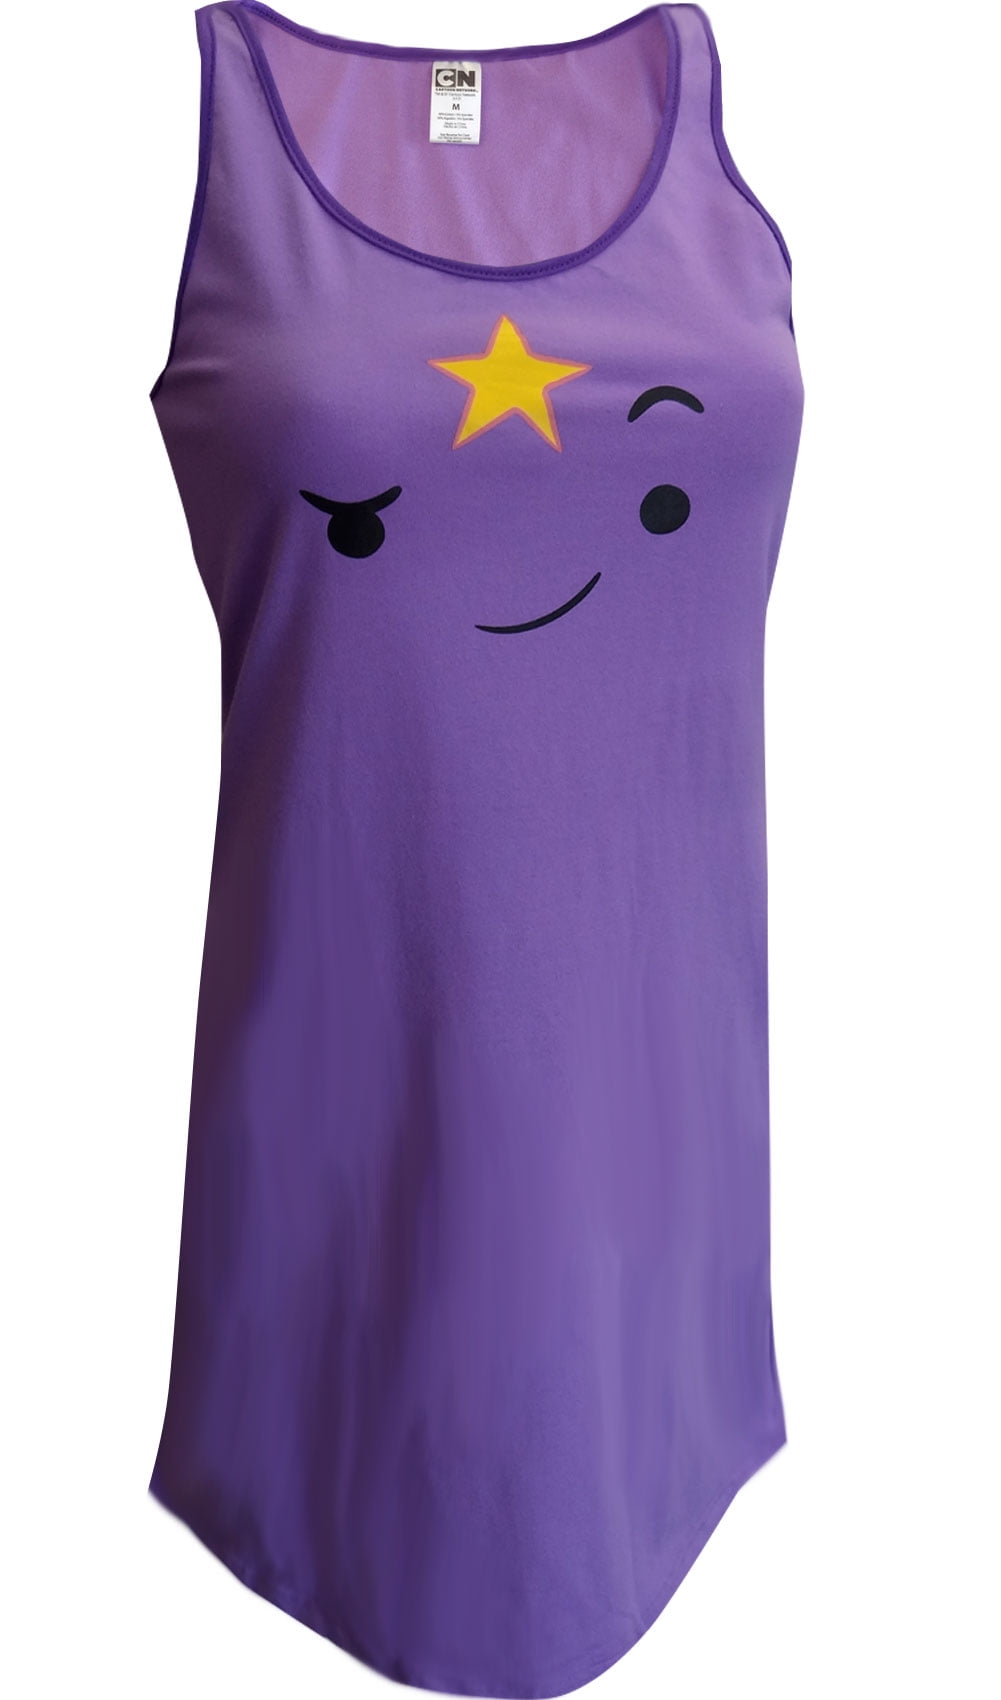 cody scheller recommends lumpy space princess crop top pic